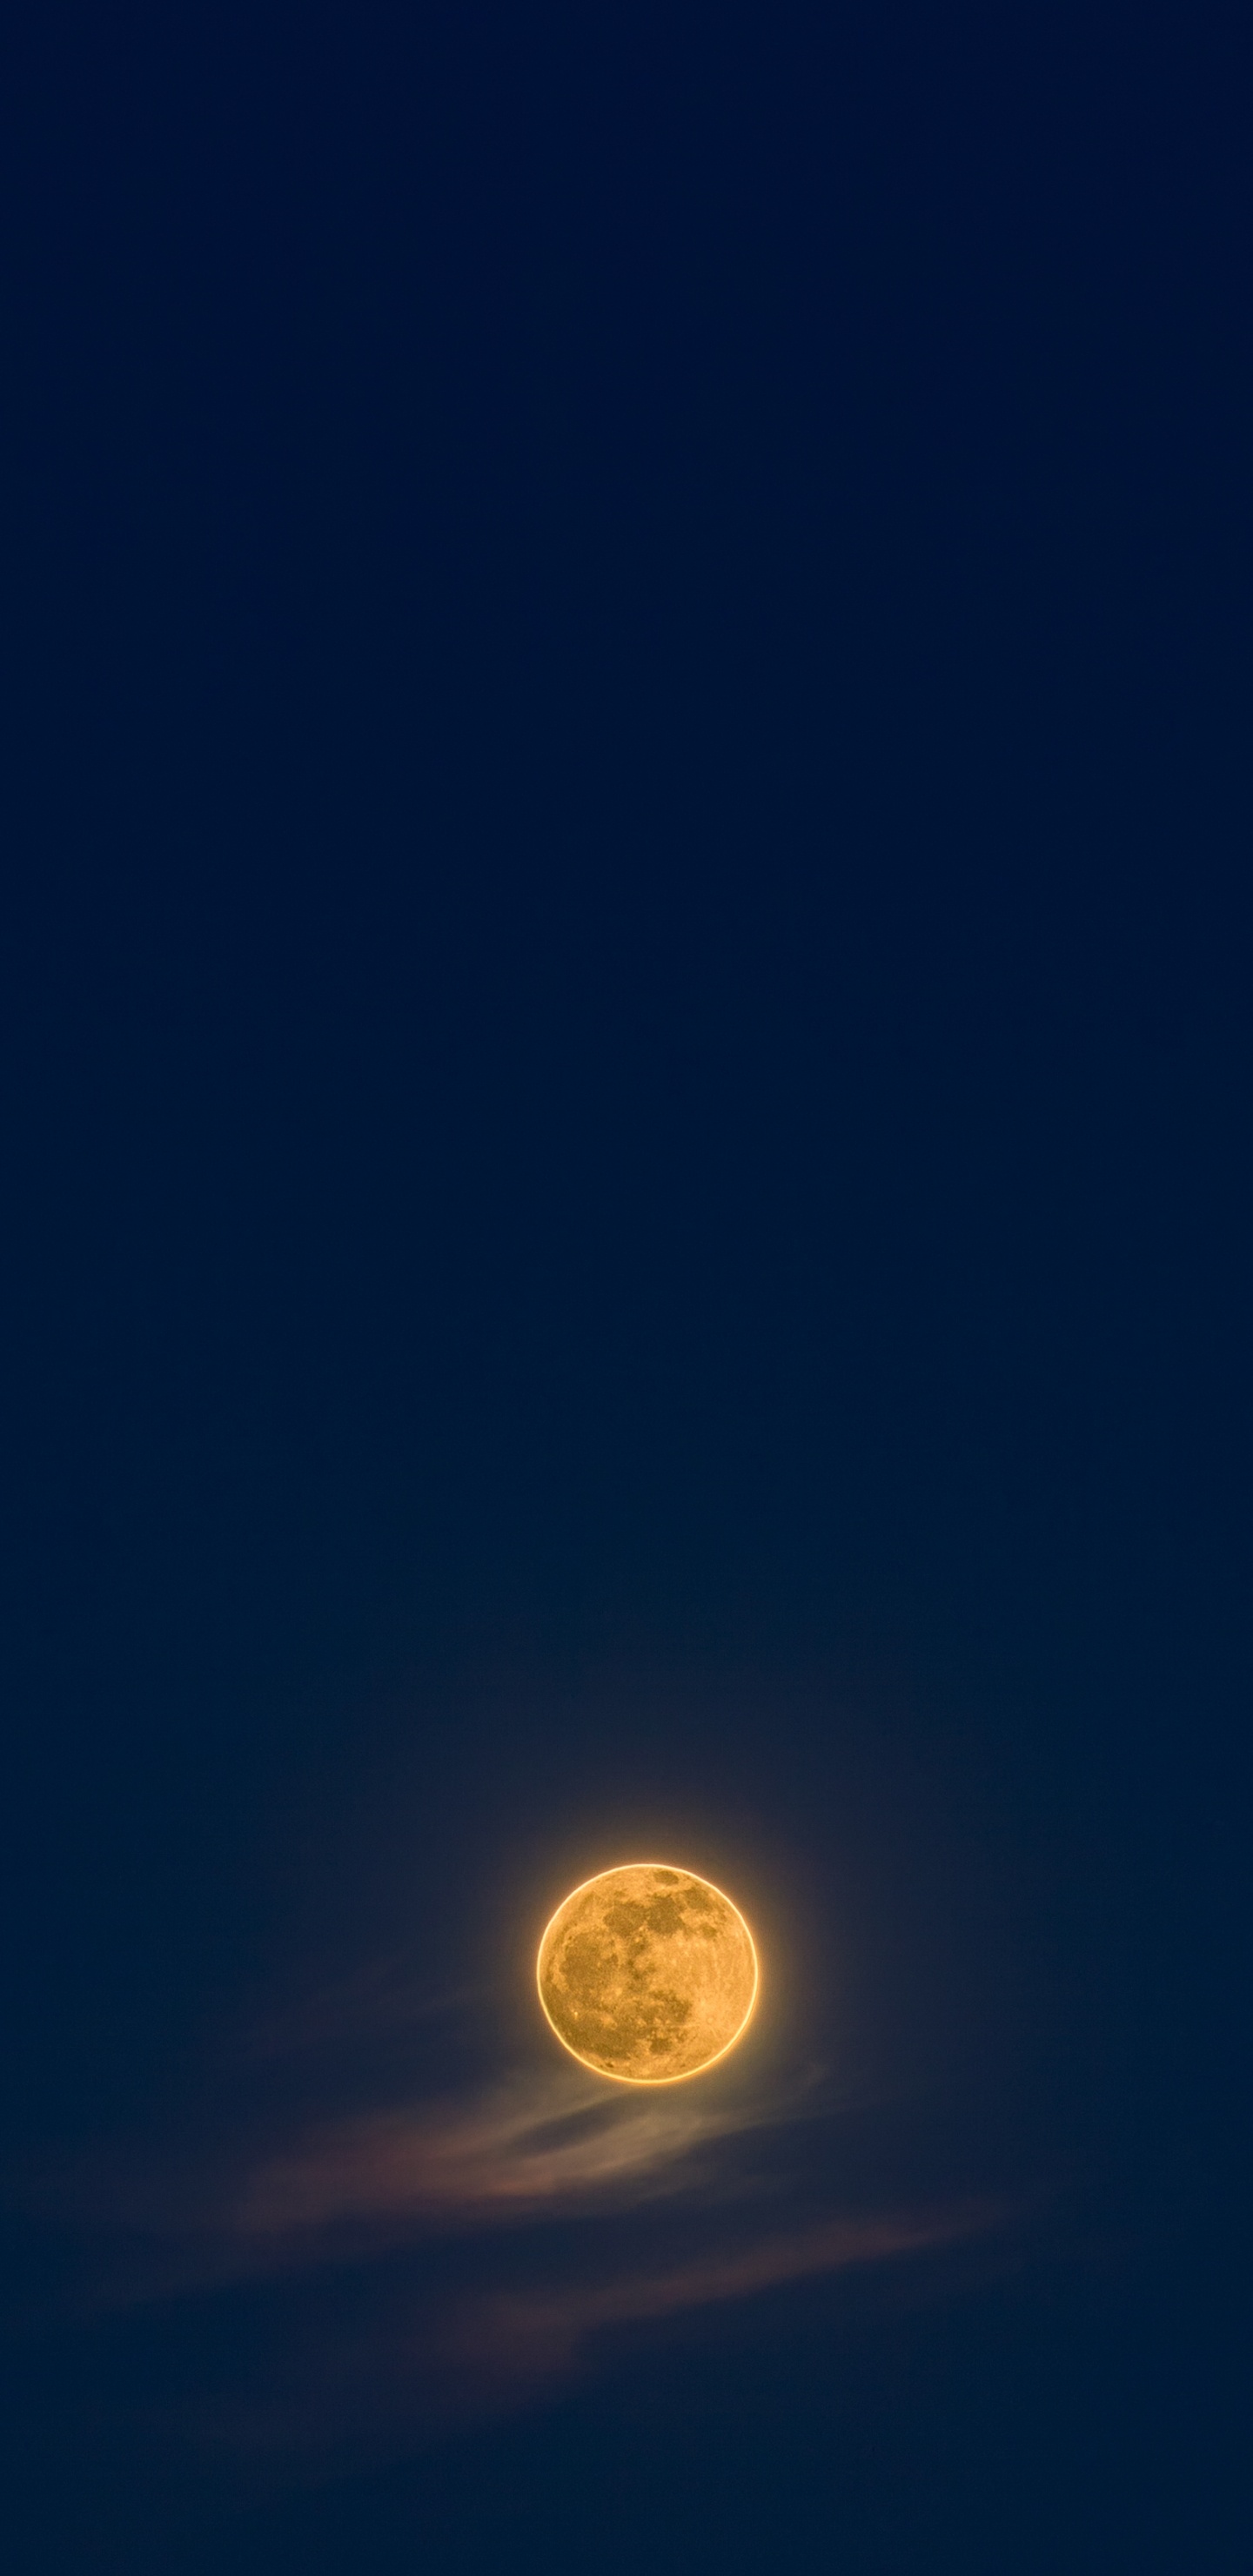 Full Moon in The Sky. Wallpaper in 1440x2960 Resolution